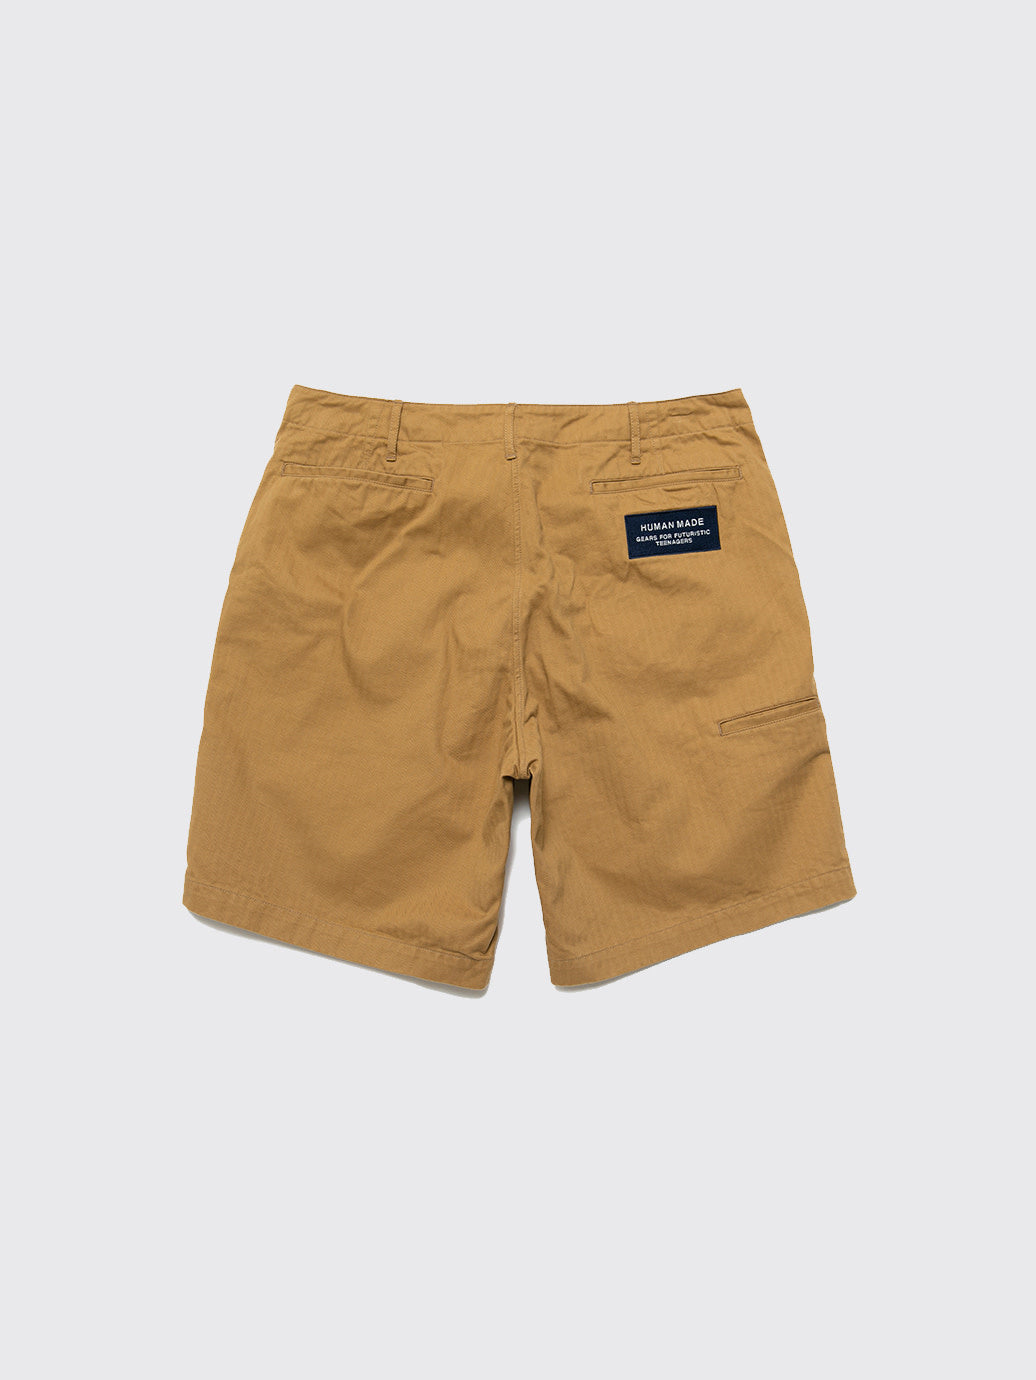 Human Made Embroidered Chino Shorts SS22 Navy – OALLERY